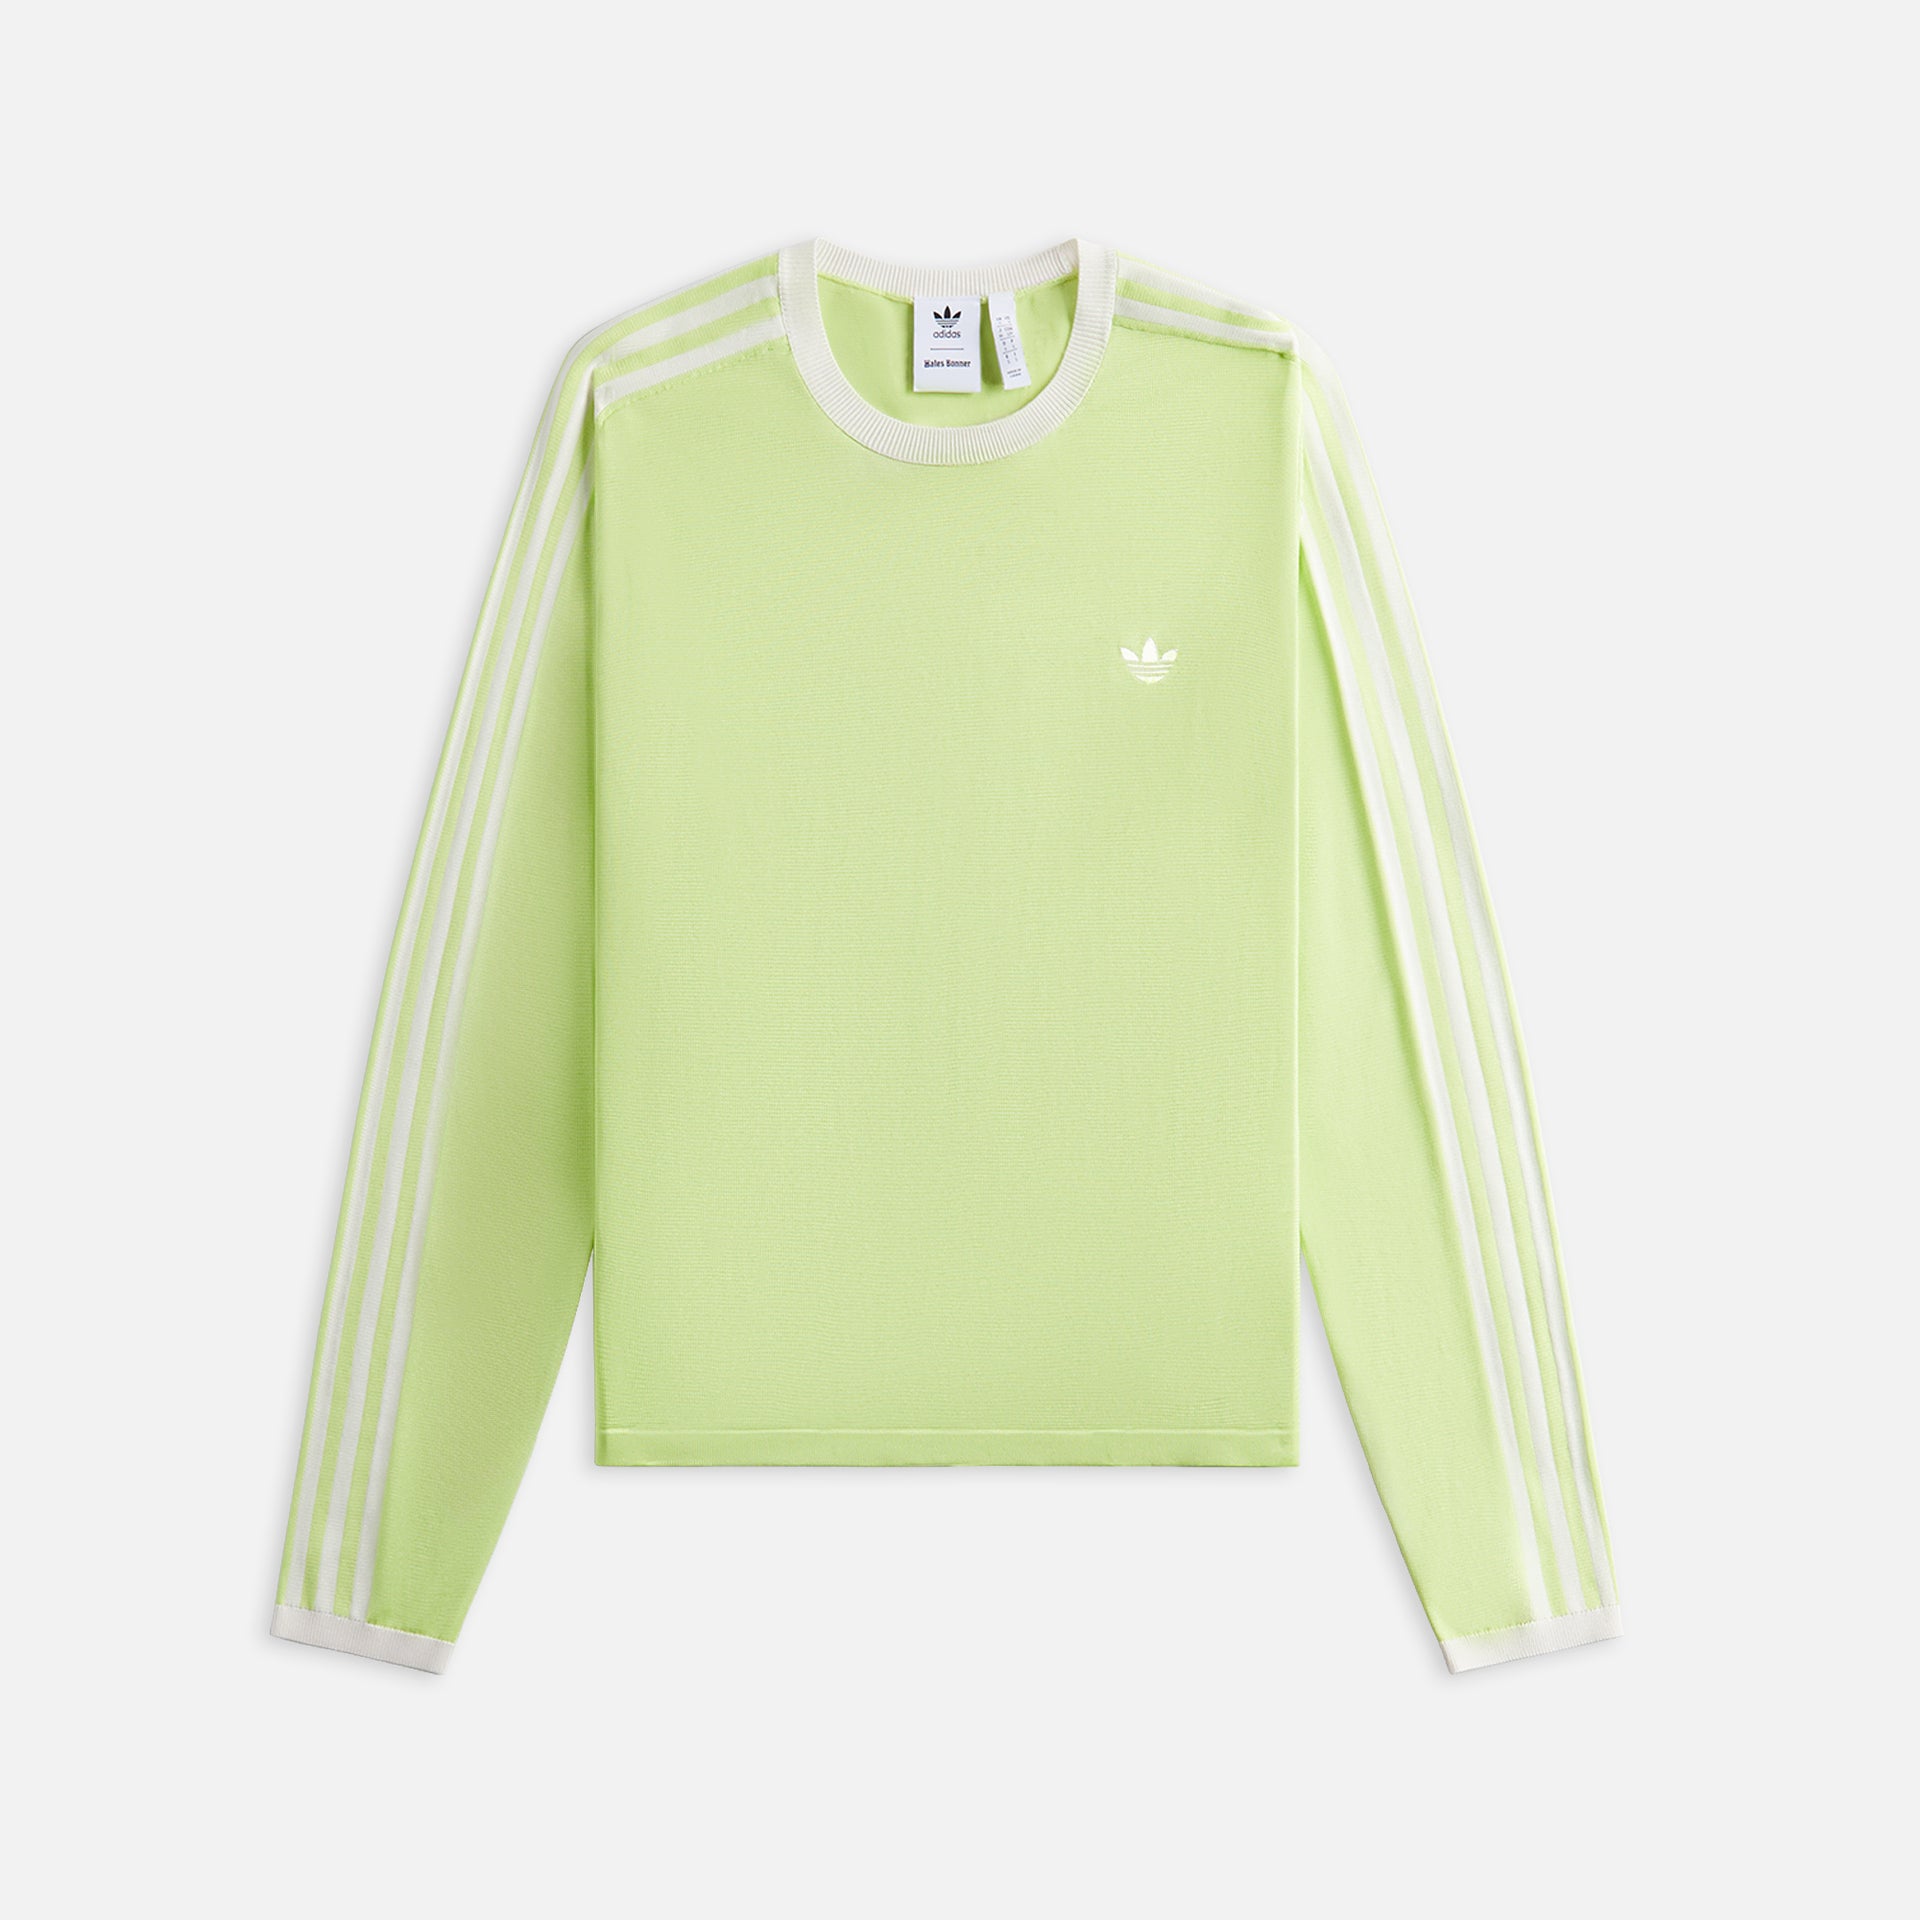 adidas Originals by Wales Bonner Long Sleeve Knit Tee - Lime